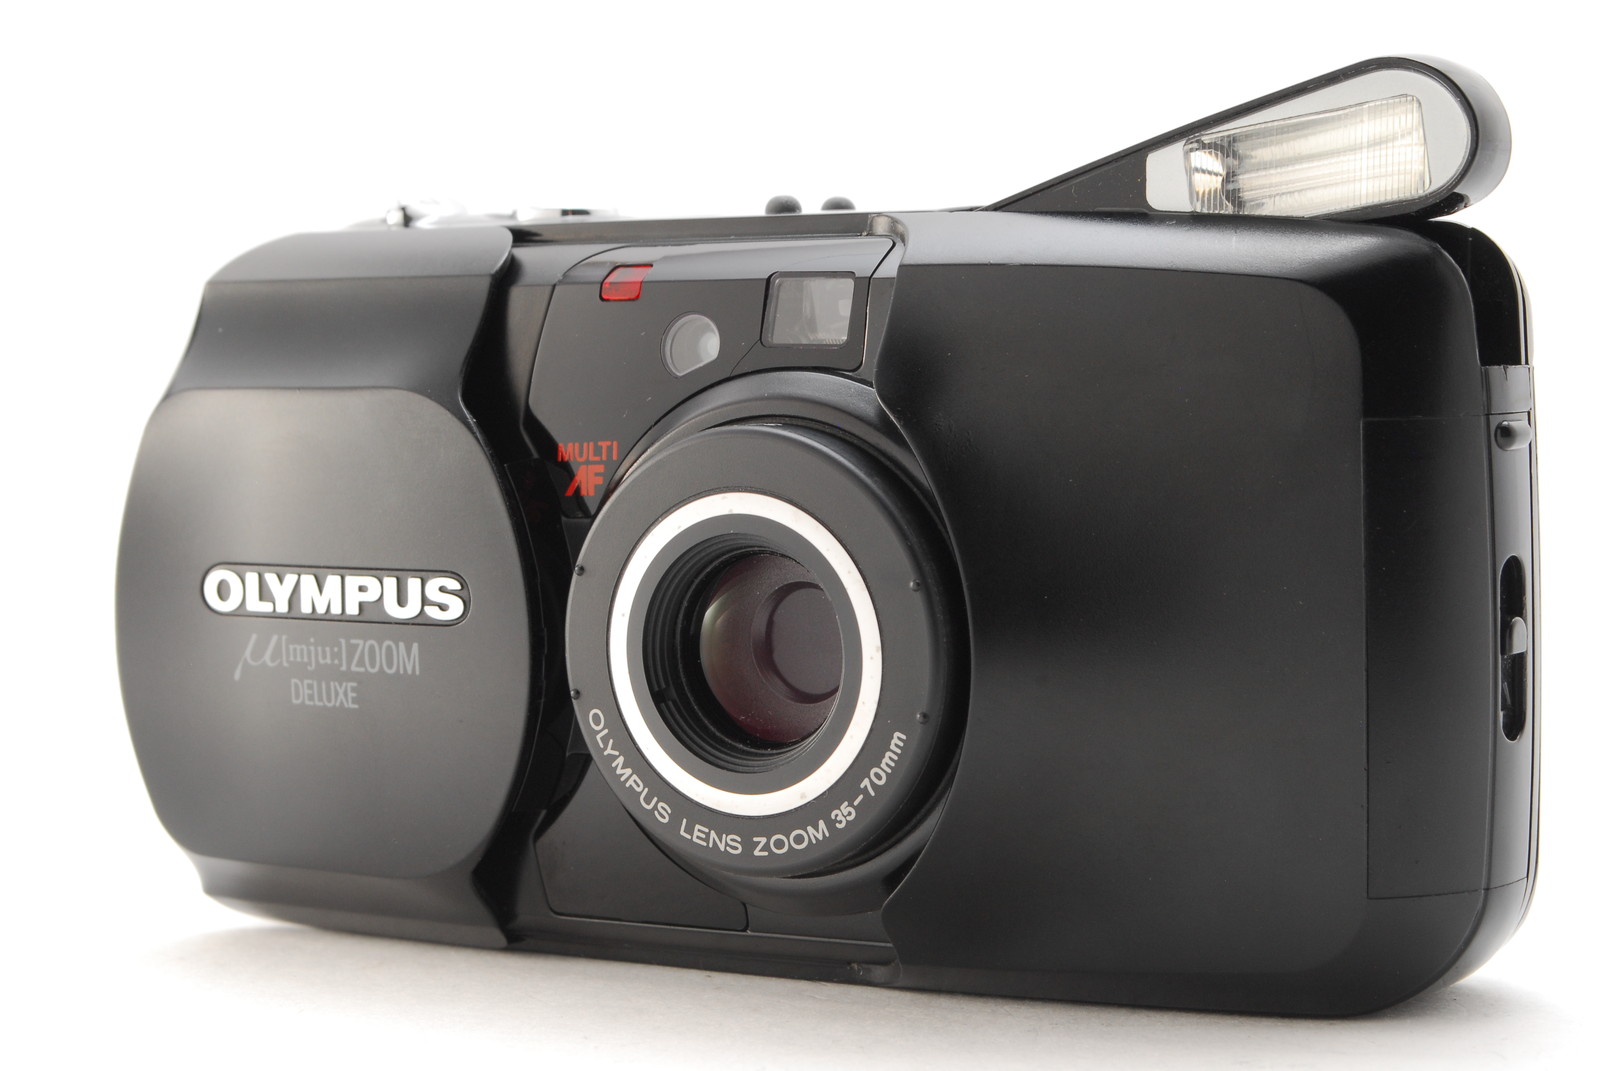 PROMOTION. NEAR MINT Olympus mju ZOOM DELUXE Black Body 35-70mm Point and Shoot Camera 近乎完好奥林巴斯 mju ZOOM DELUXE 黑色机身 35-70 毫米傻瓜相机